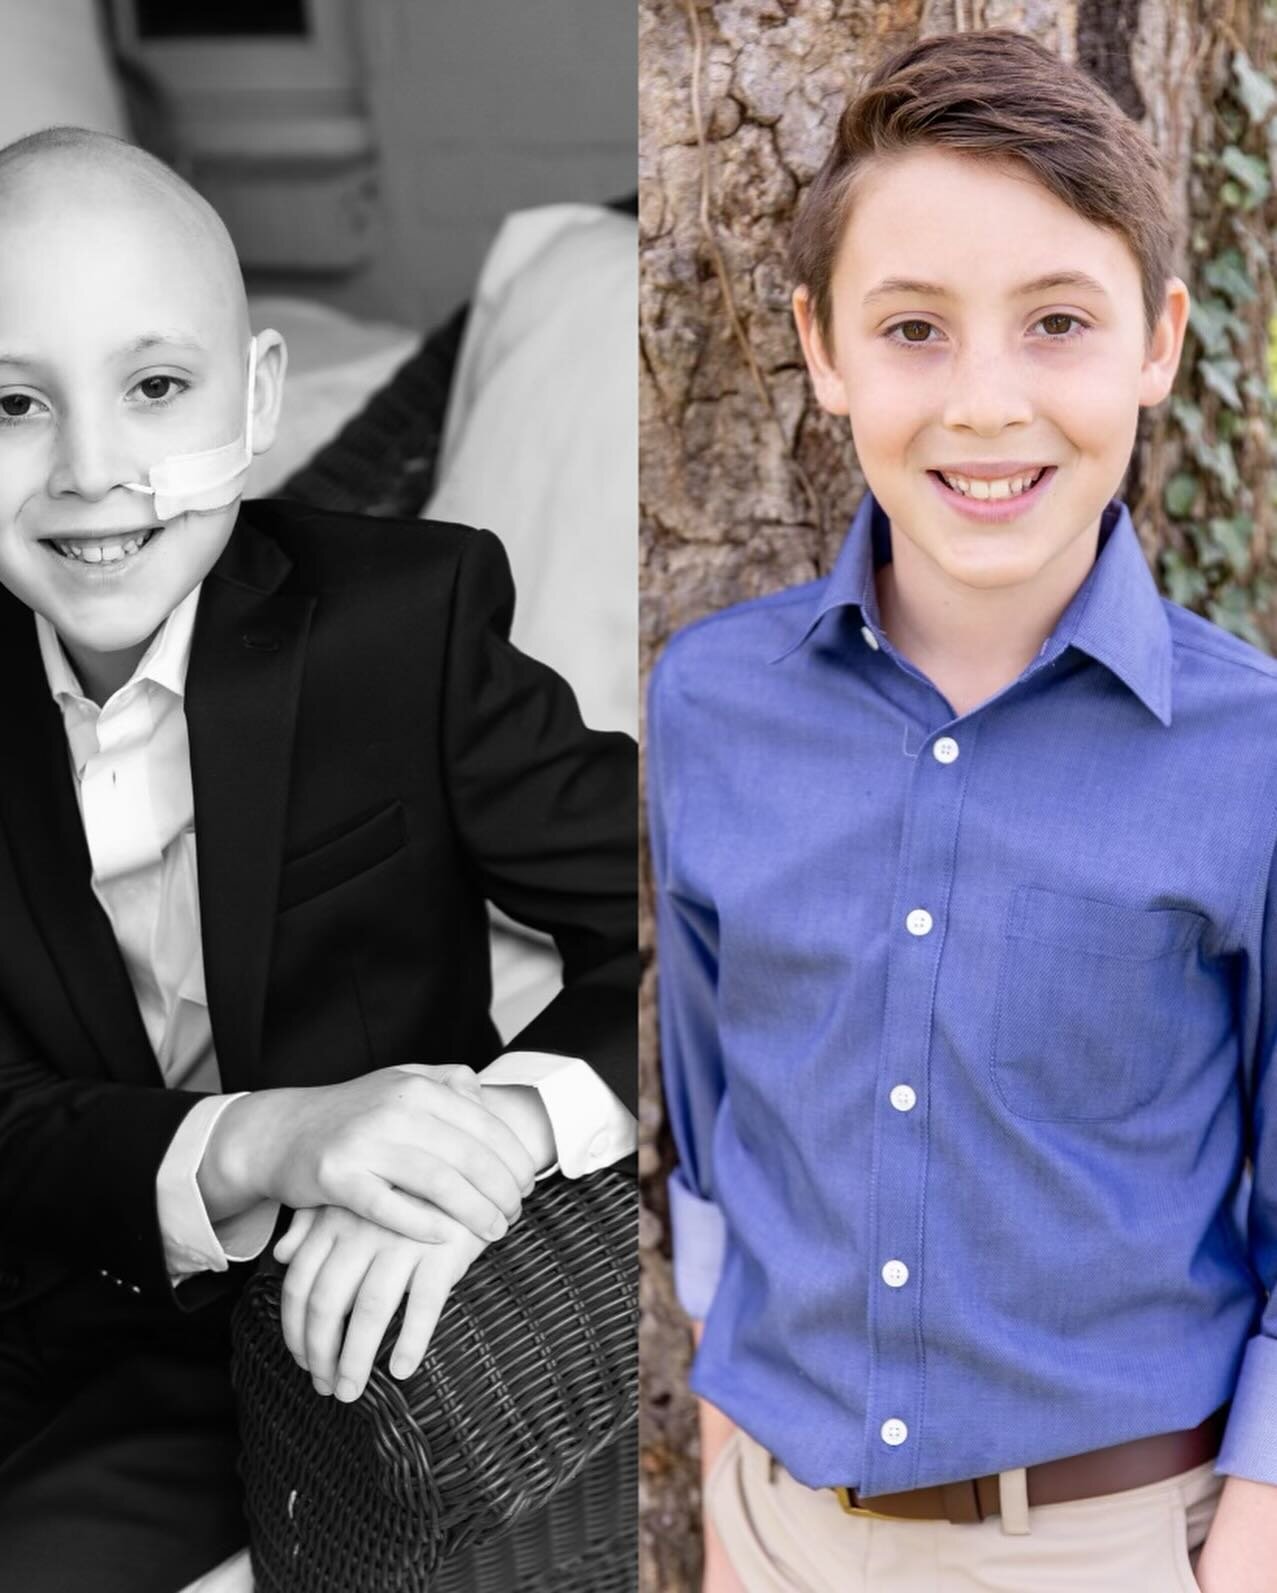 &ldquo;Rally Kid Lane couldn&rsquo;t be at our celebration last April, because he was in the hospital fighting his brain cancer. Because of cancer research, amazing doctors and nurses - Lane is thriving! This is why we rally! If you find it in your h